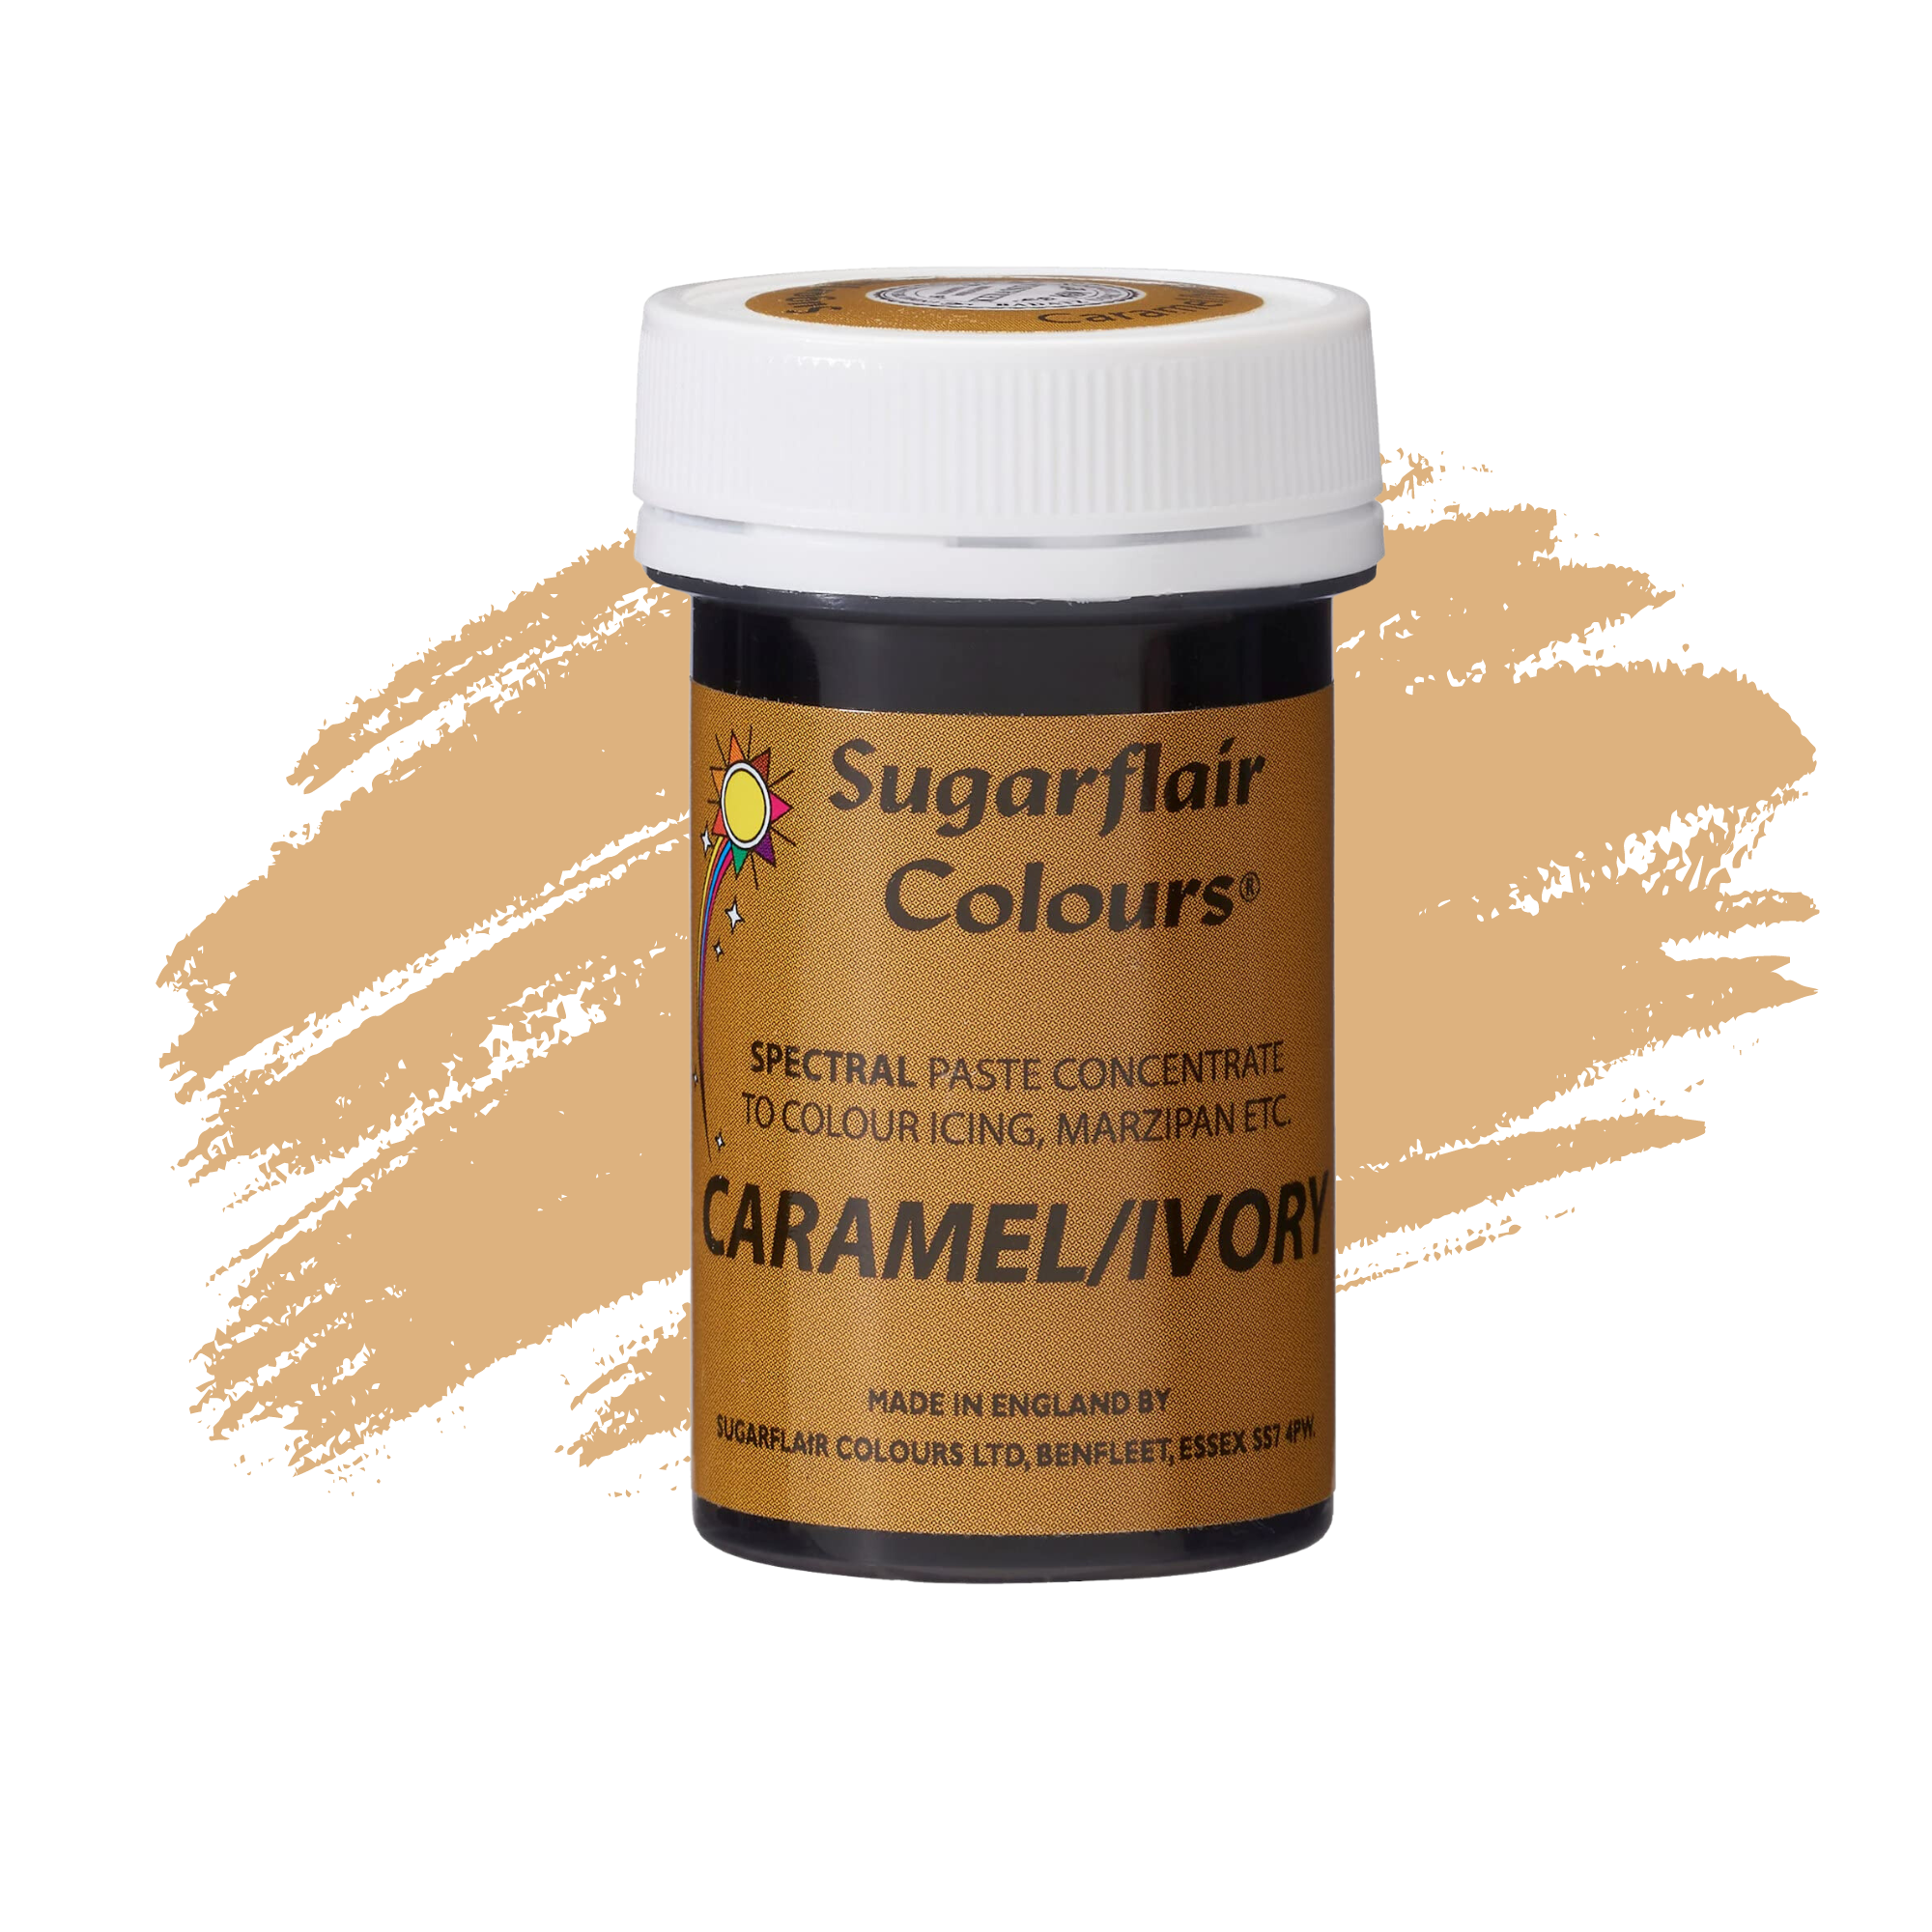 Sugarflair Paste Colours Concentrated Food Colouring - Spectral Caramel/Ivory - 25g